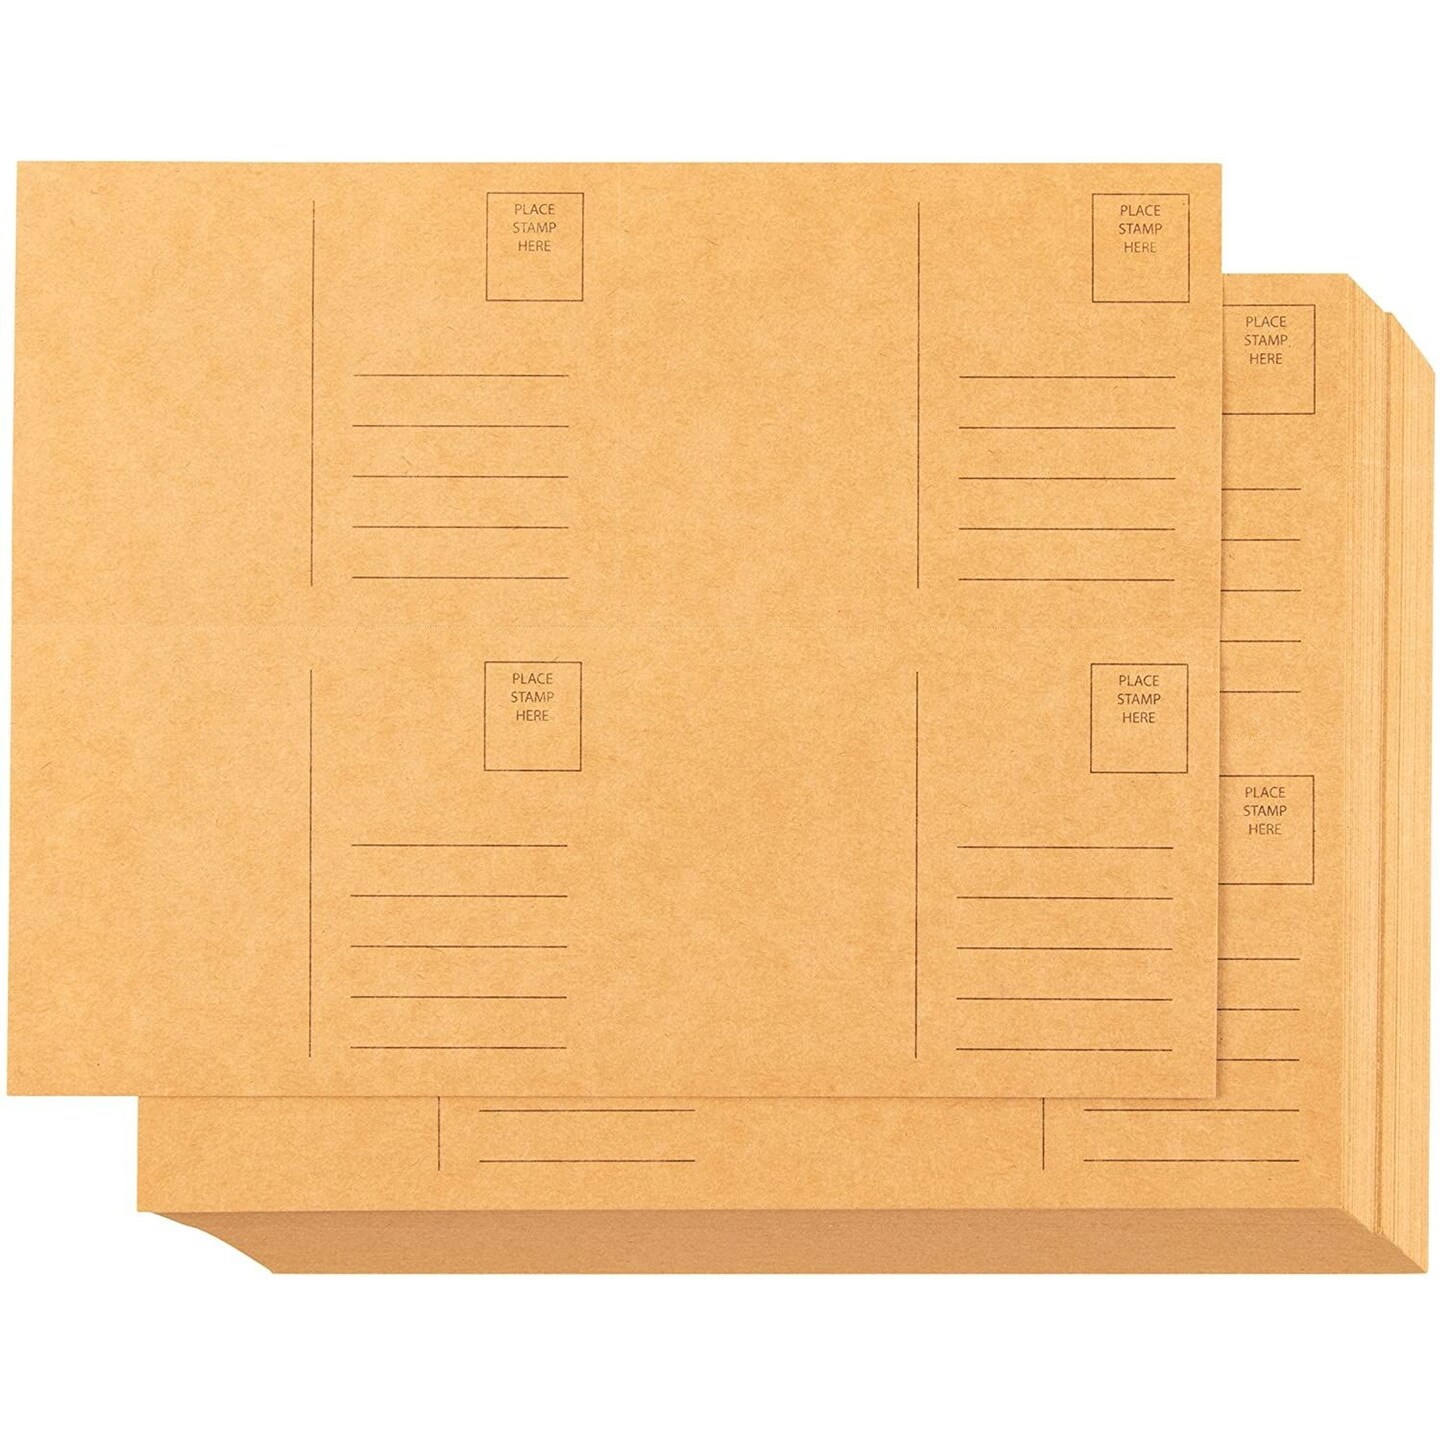 Blank Postcards - 100-Sheet Kraft Postcards, Self Mailer Mailing Side  Postcards, 4 Per Page 400 Postcards in Total, Perforated, 4 x 6 Inches